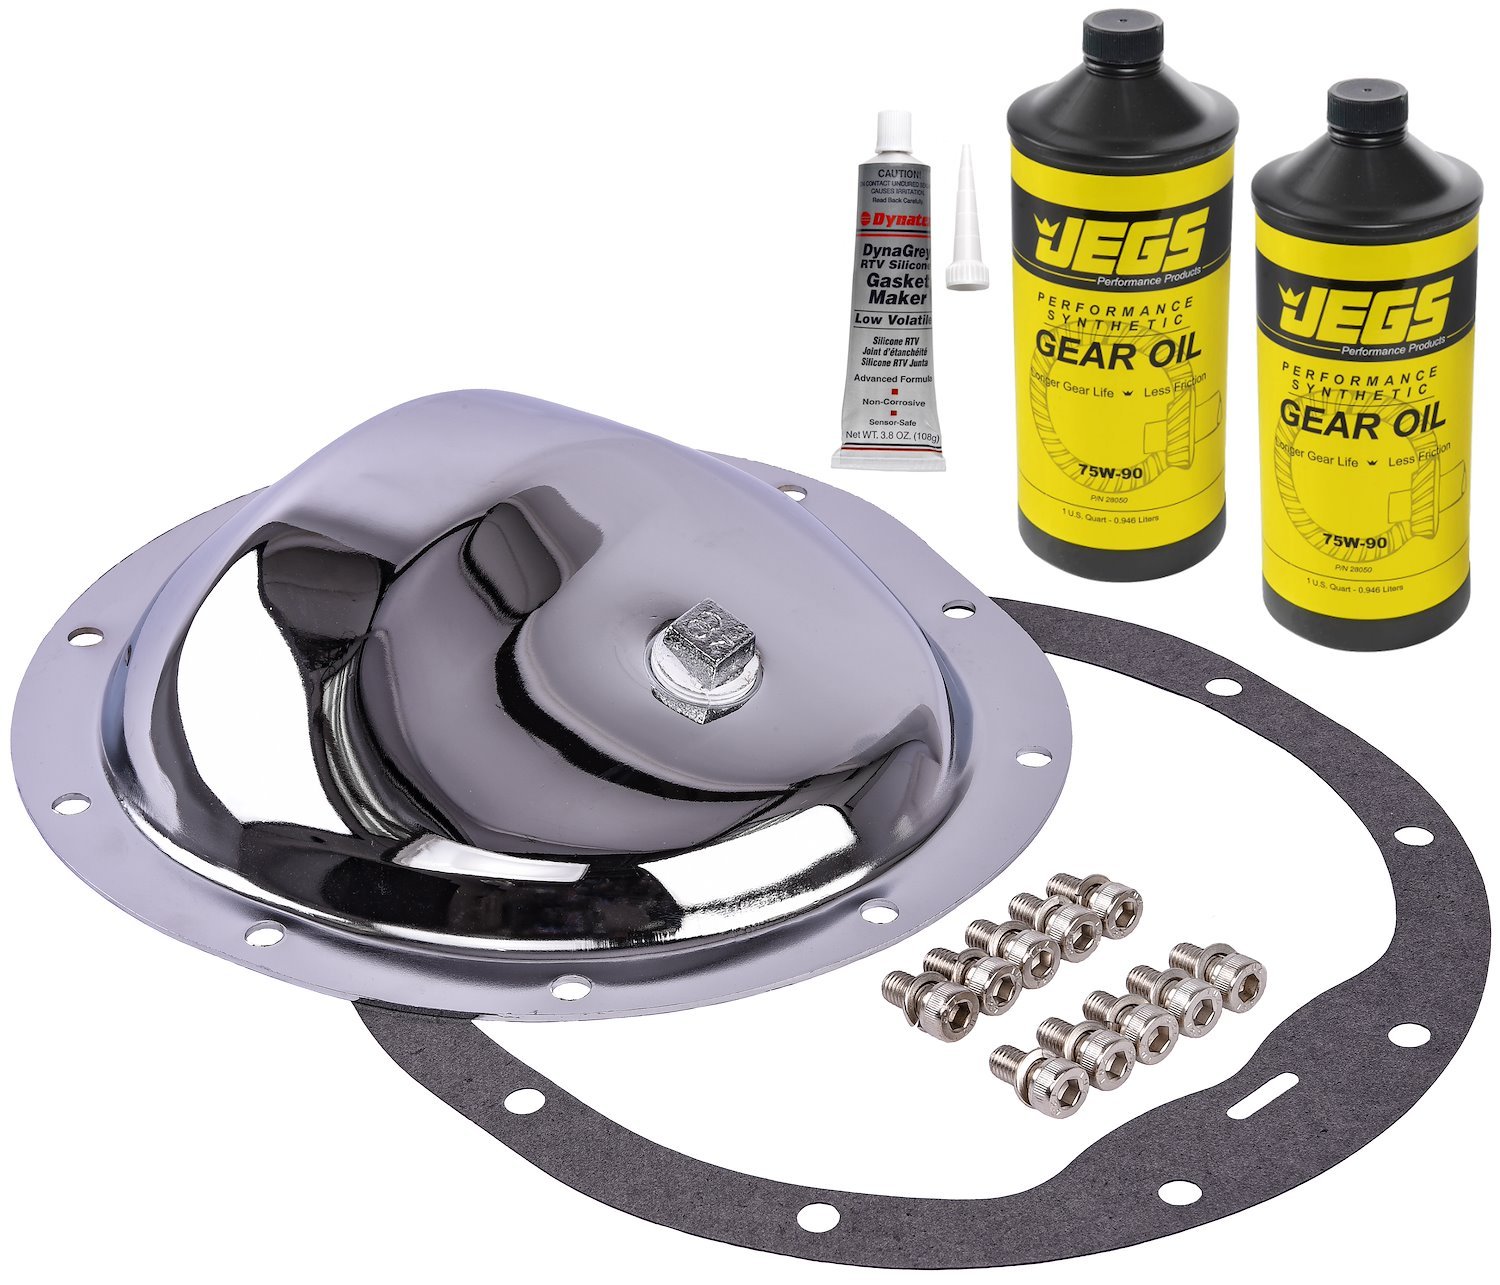 Chrome-Plated Differential Cover & Gear Oil Kit [GM 8.5 in. 10-Bolt]